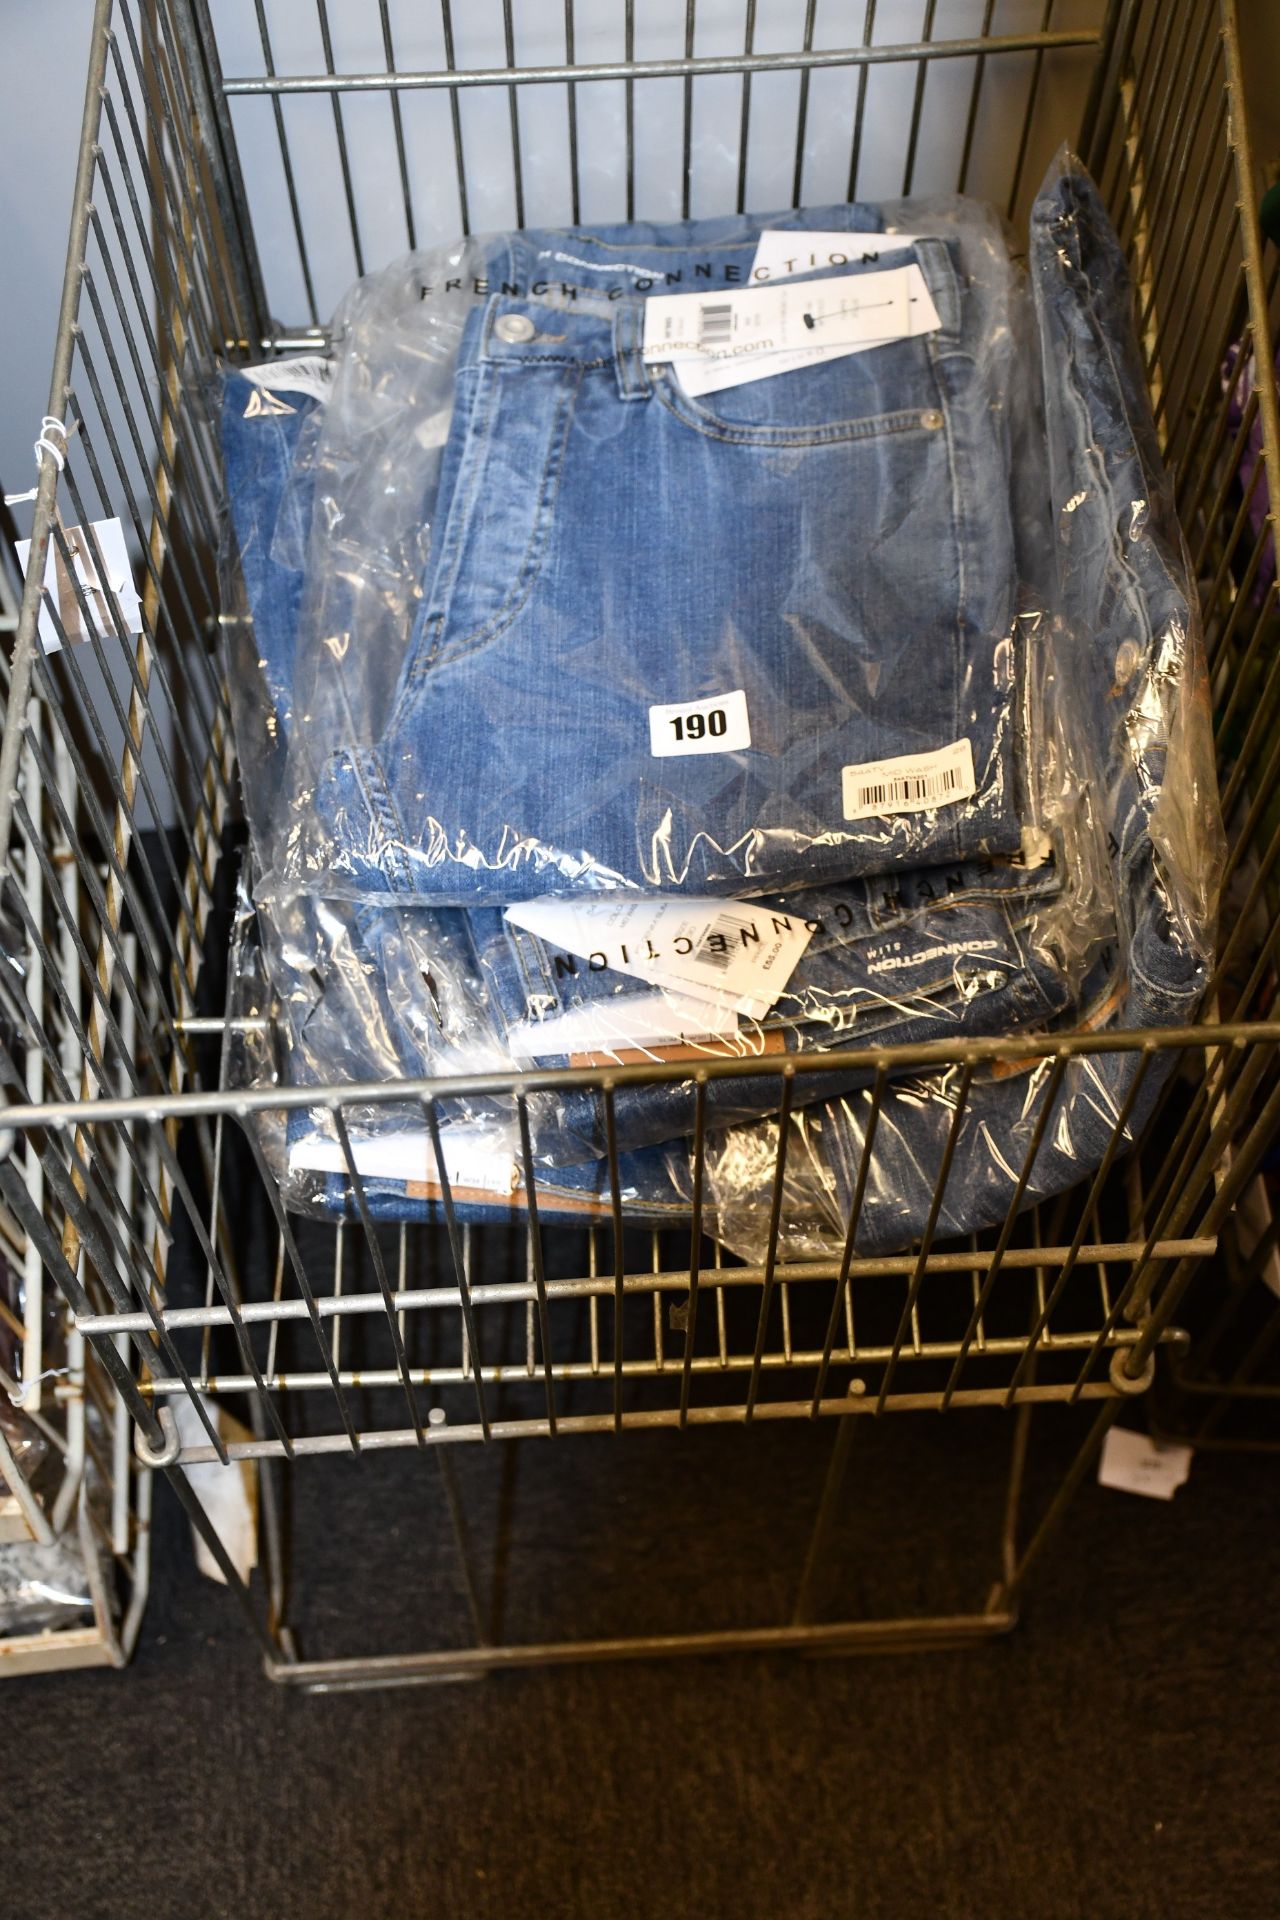 Five pairs of as new French Connection jeans (Sizes 28, 30, 34, 36,38 - RRP £55 each).